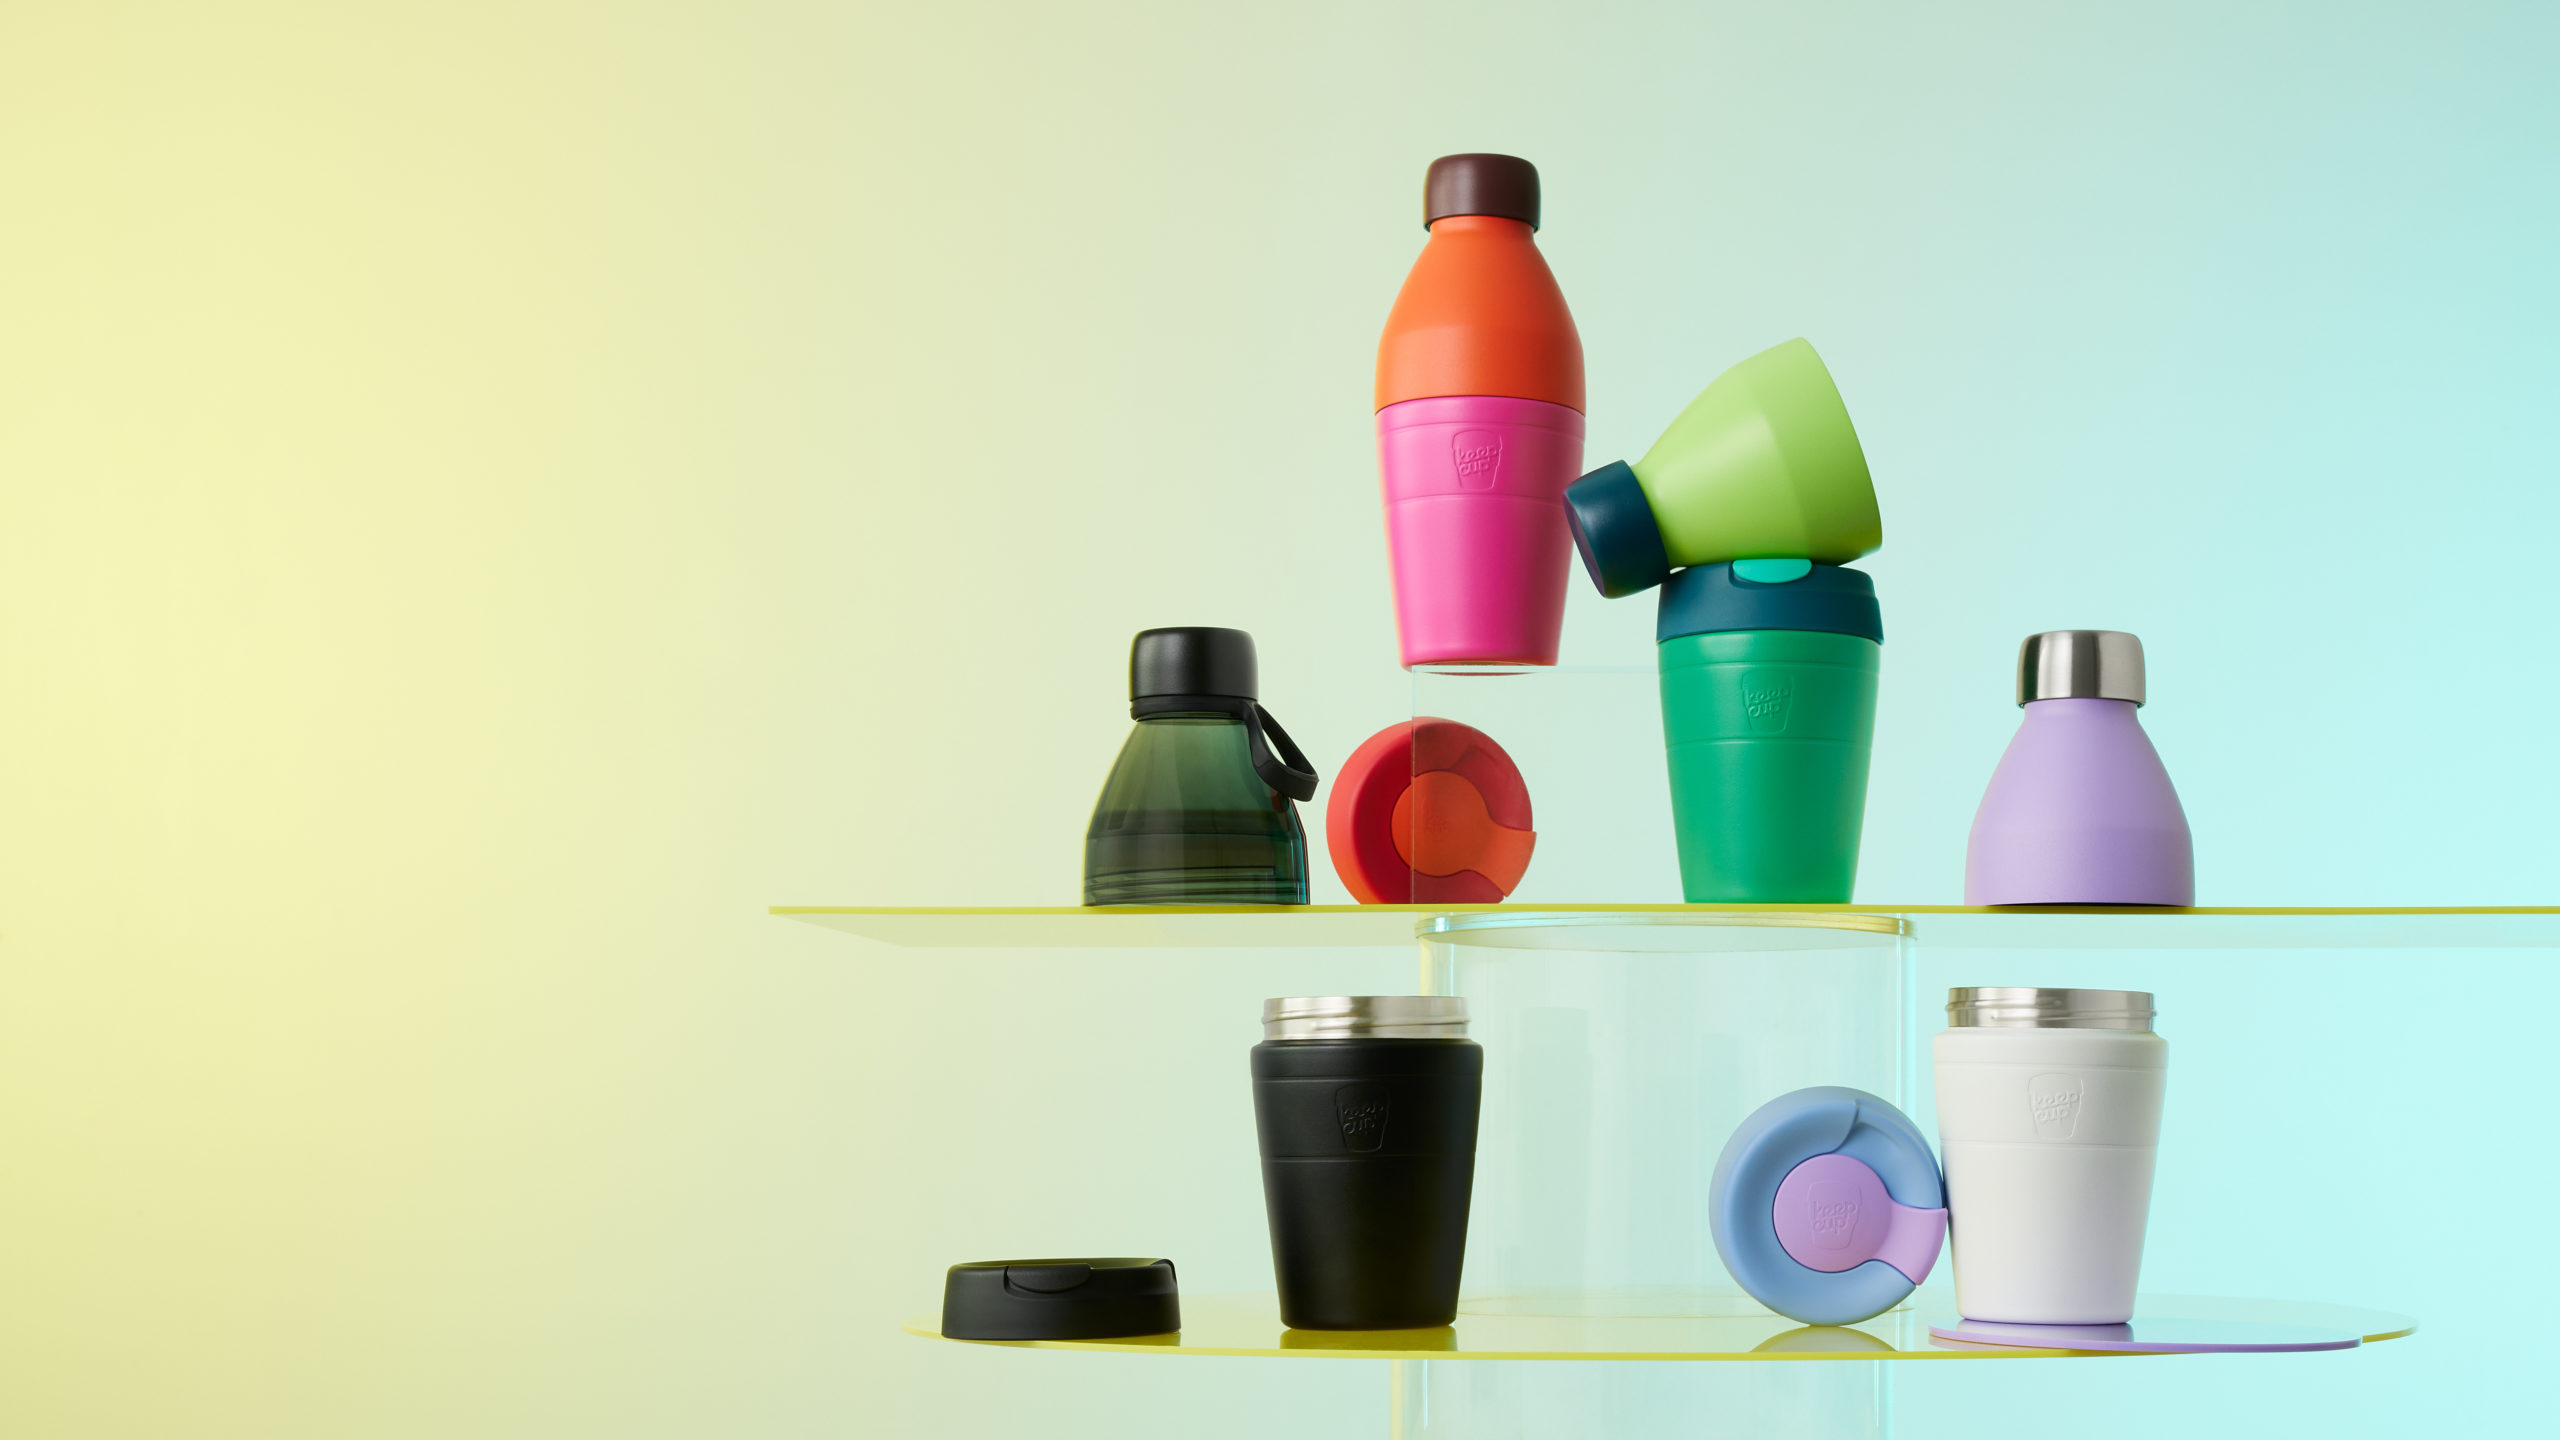 KeepCup Launches Innovative Cup-To-Bottle Kit